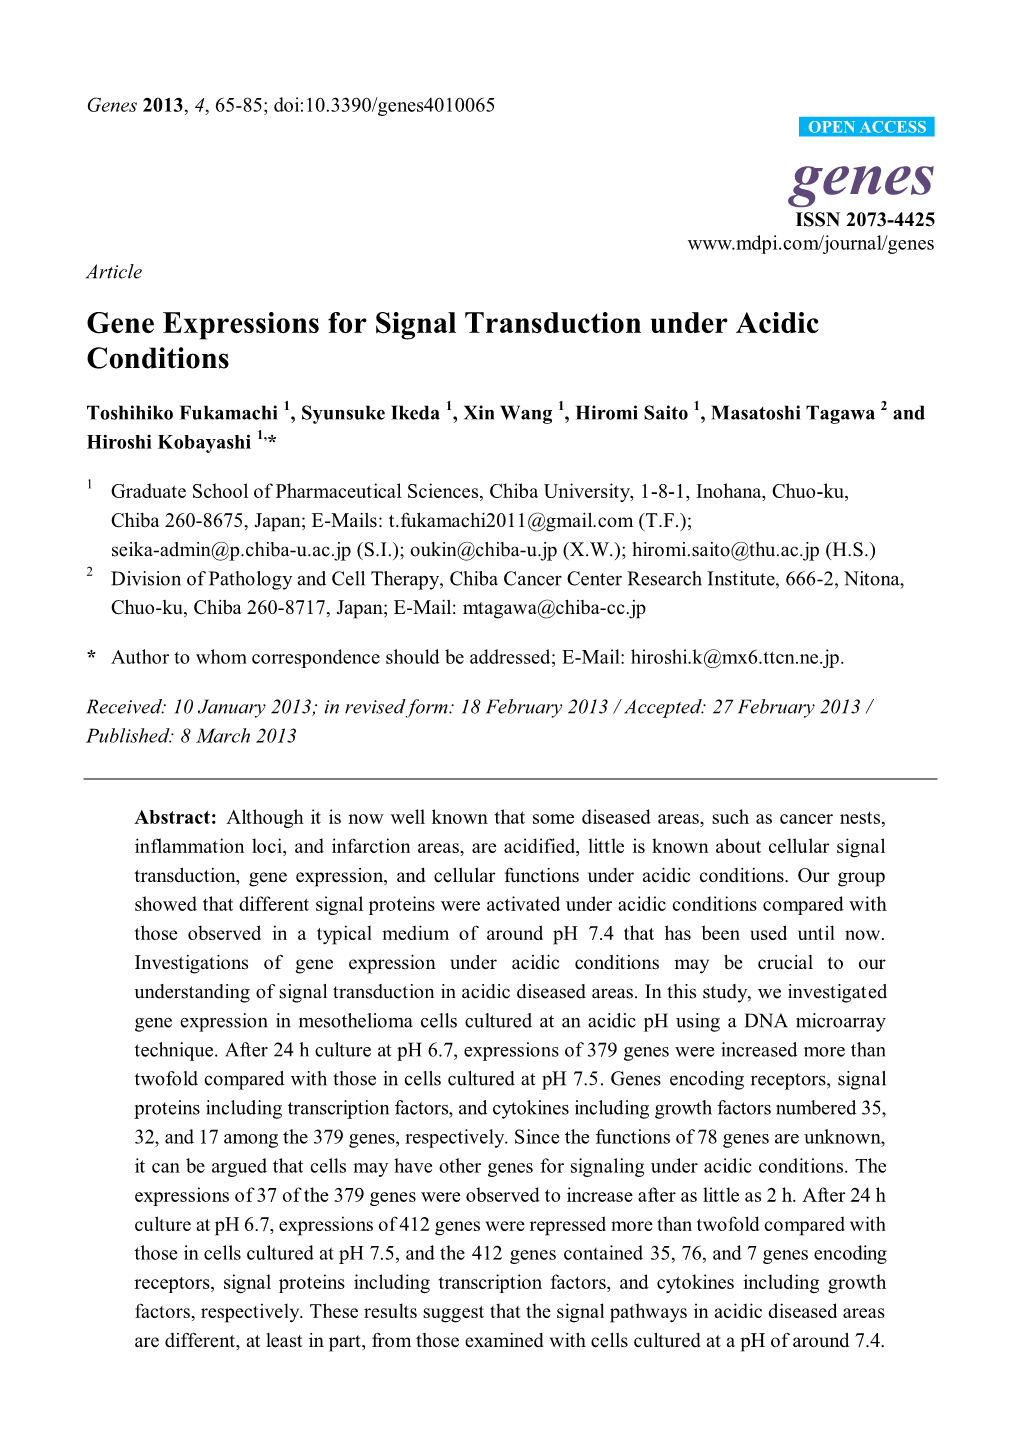 Gene Expressions for Signal Transduction Under Acidic Conditions